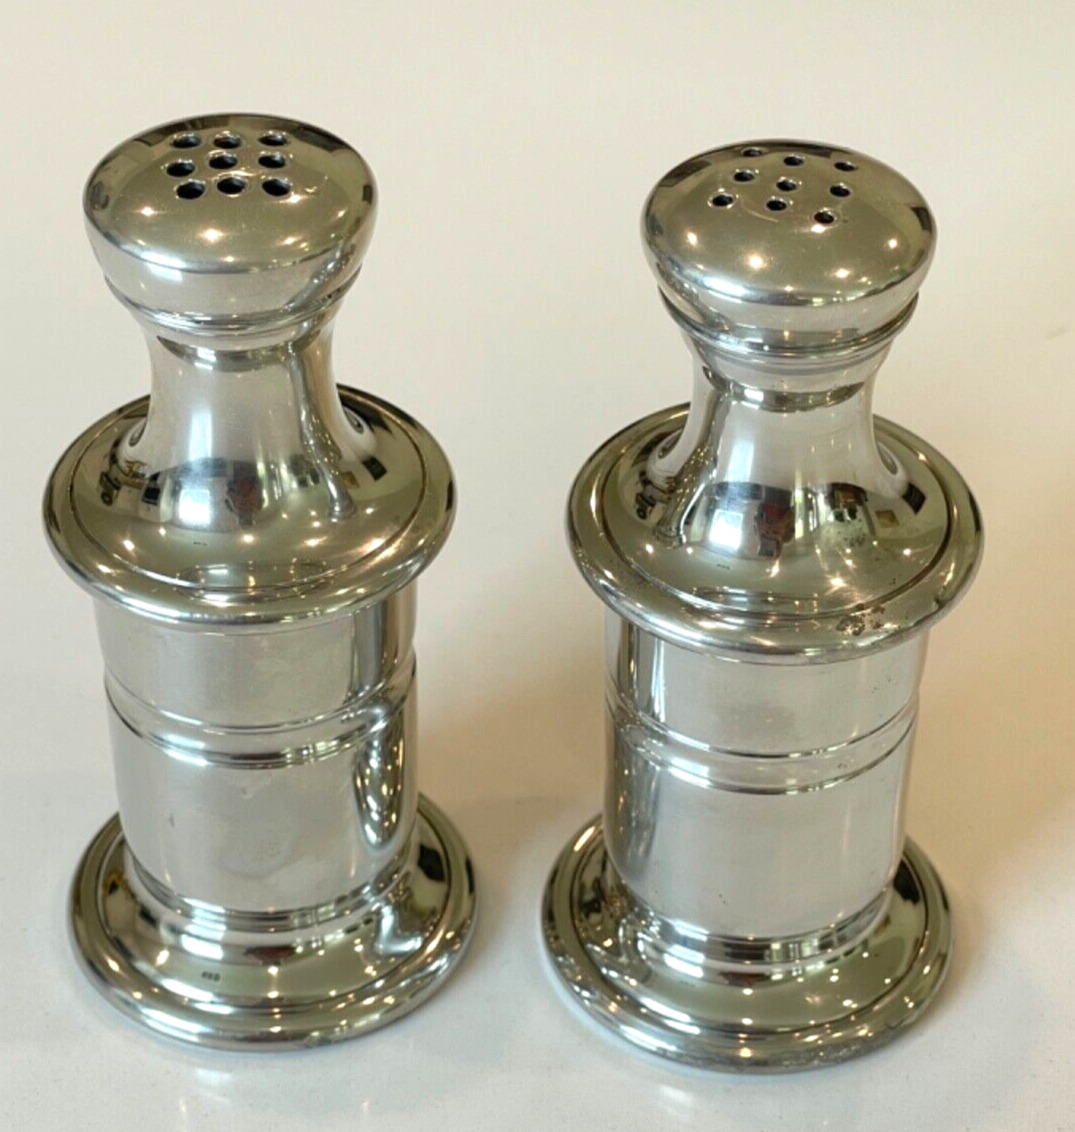 Shirley Williamsburg Virginia Hand Made Vintage Pewter Salt and Pepper Shakers